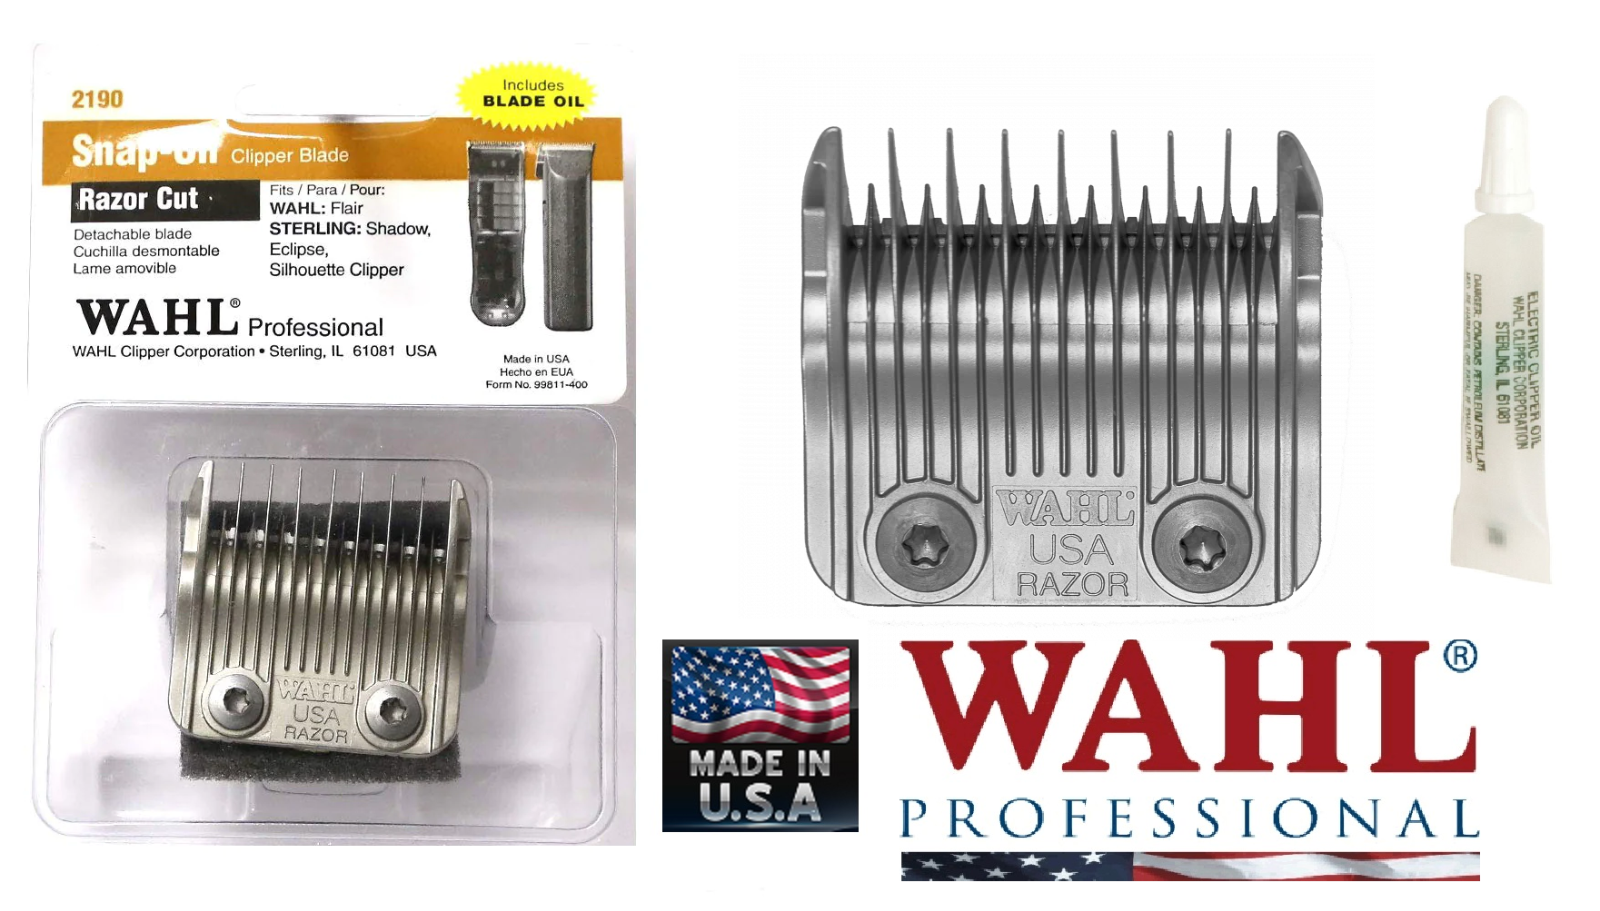 WAHL Razor Cut Snap-On BLADE Set For Flair,Sterling Eclipse,Shadow Trimmer 2190 - $29.99